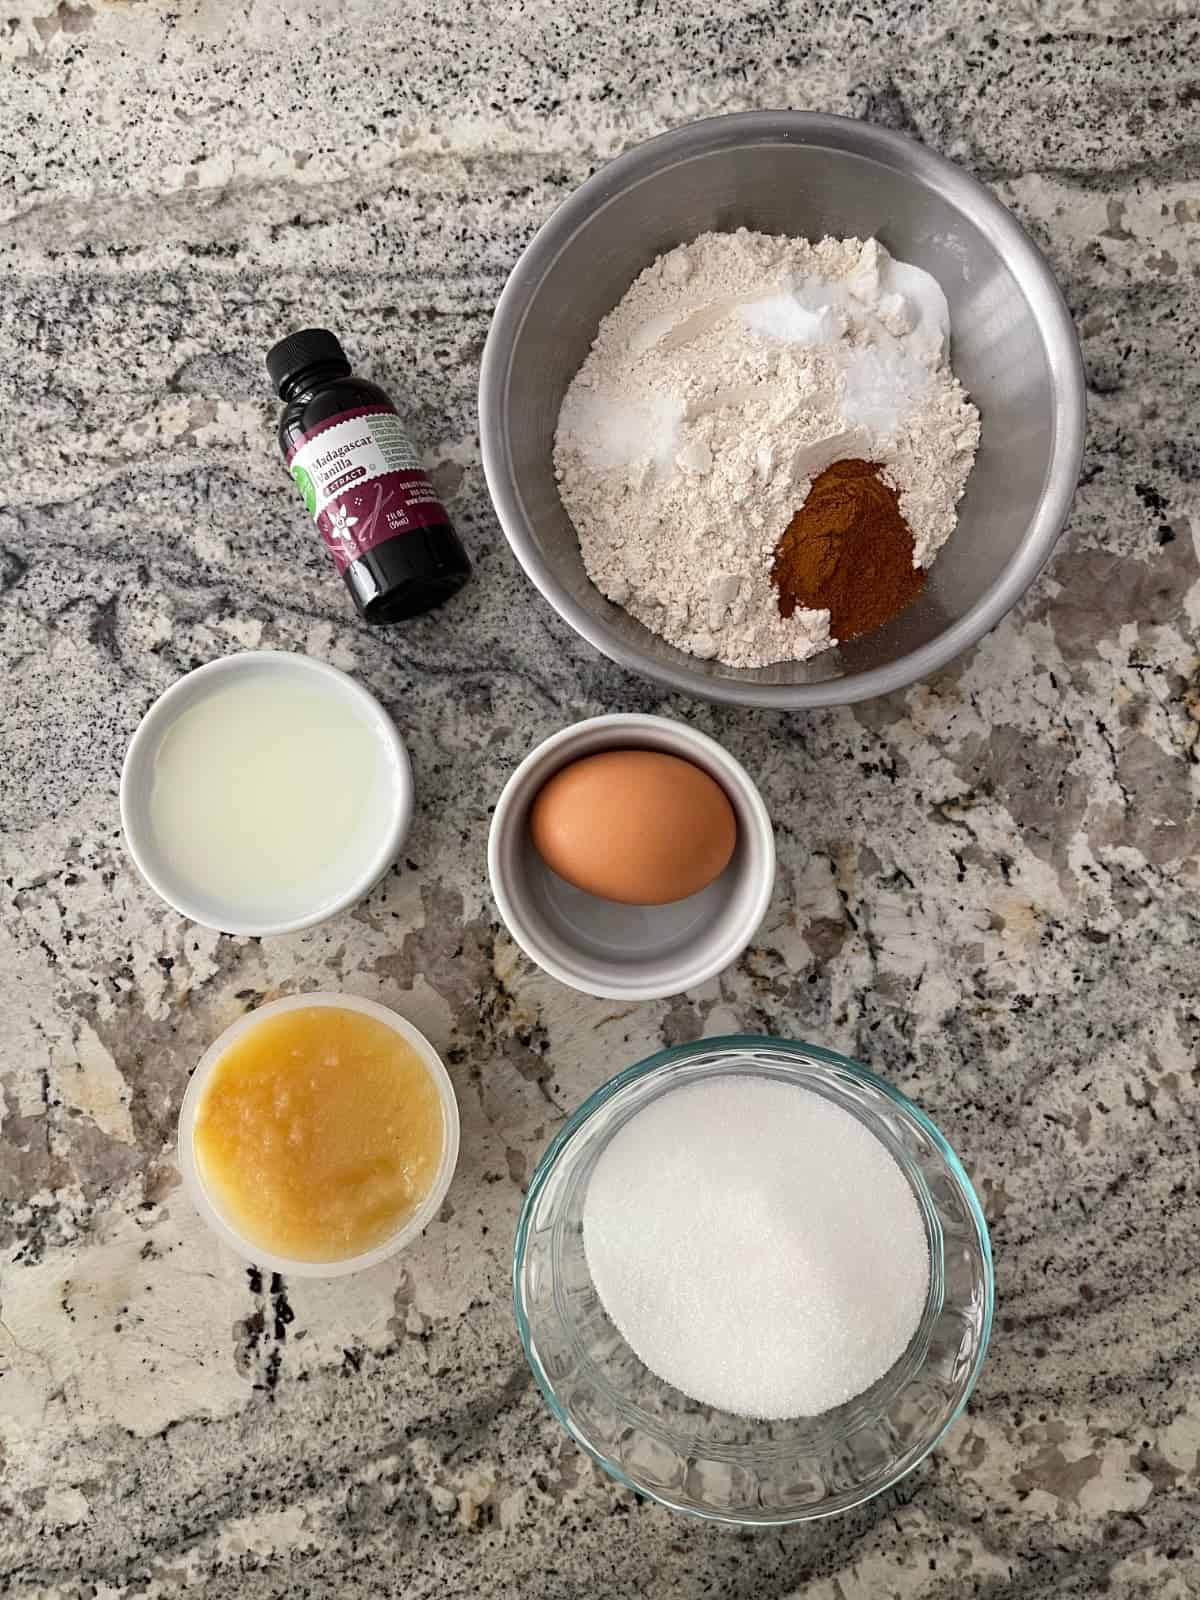 Ingredients including vanilla, unsweetened applesauce, low-fat buttermilk, Swerve sweetener, egg, whole wheat pastry flour, cinnamon, salt, and baking soda.